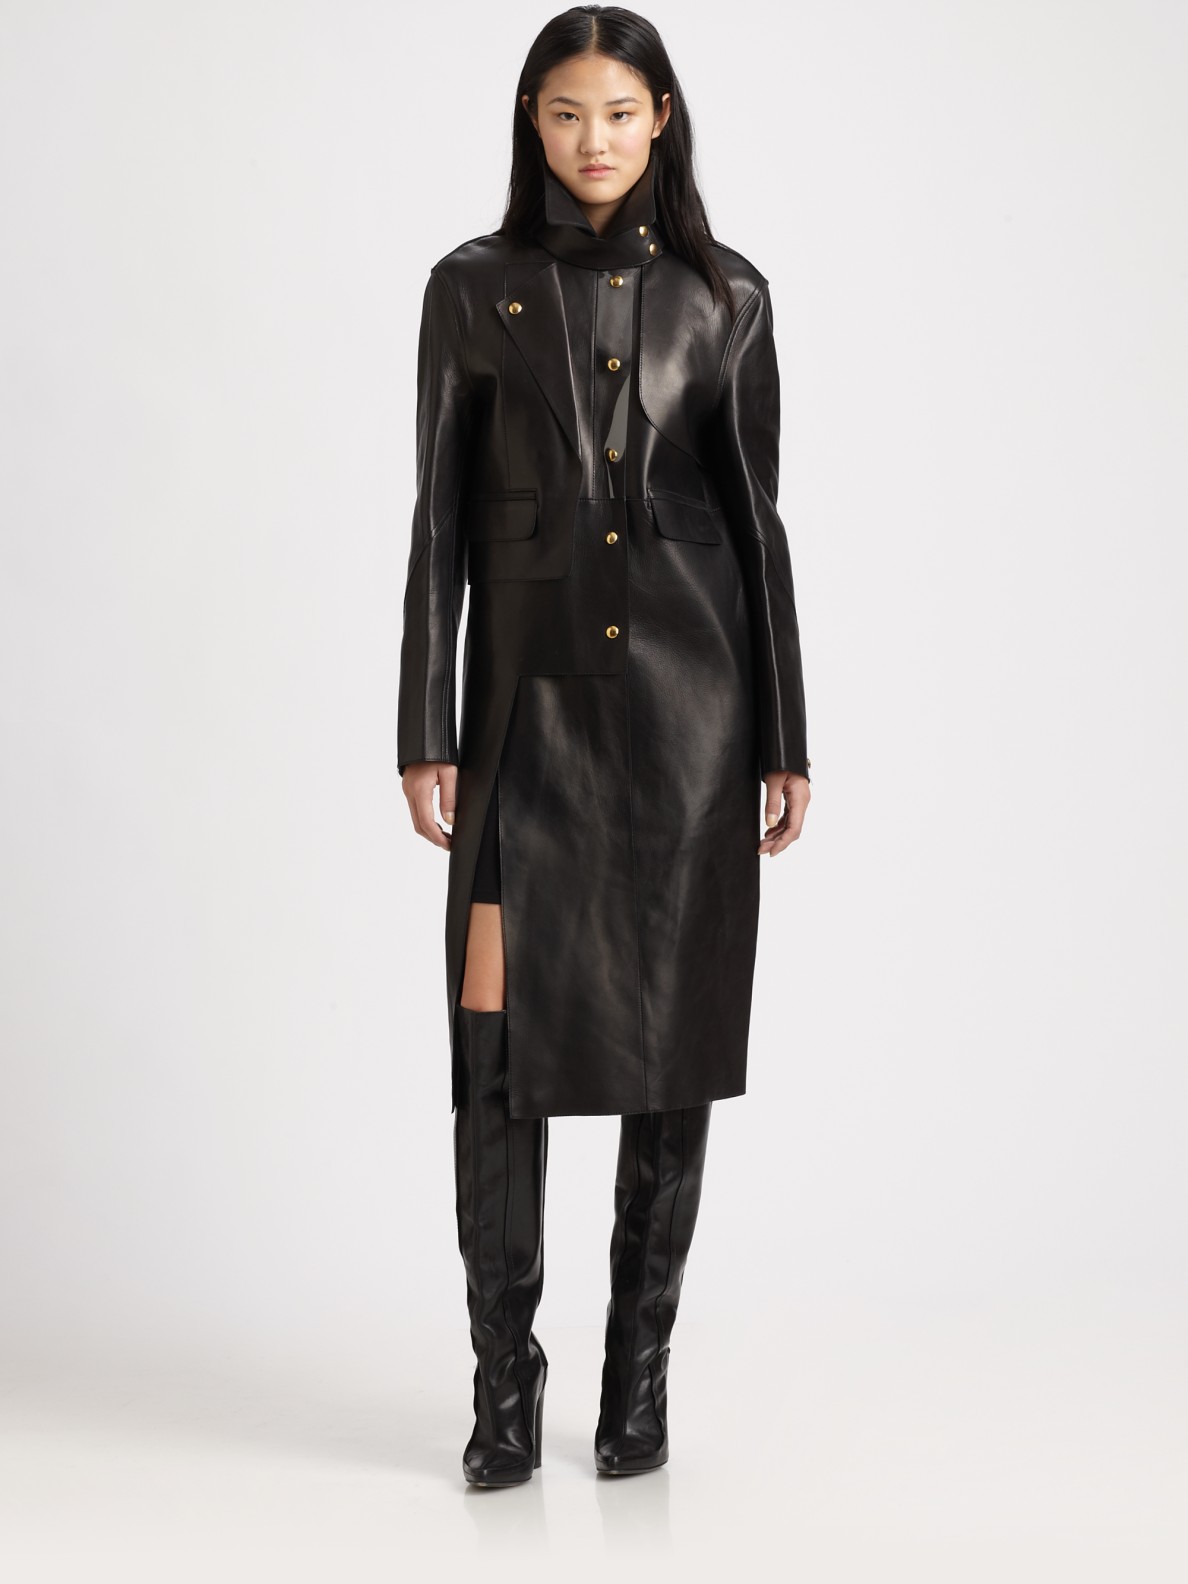 Tempel Gods Prelude Alexander Wang Leather Trench Coat in Black | Lyst